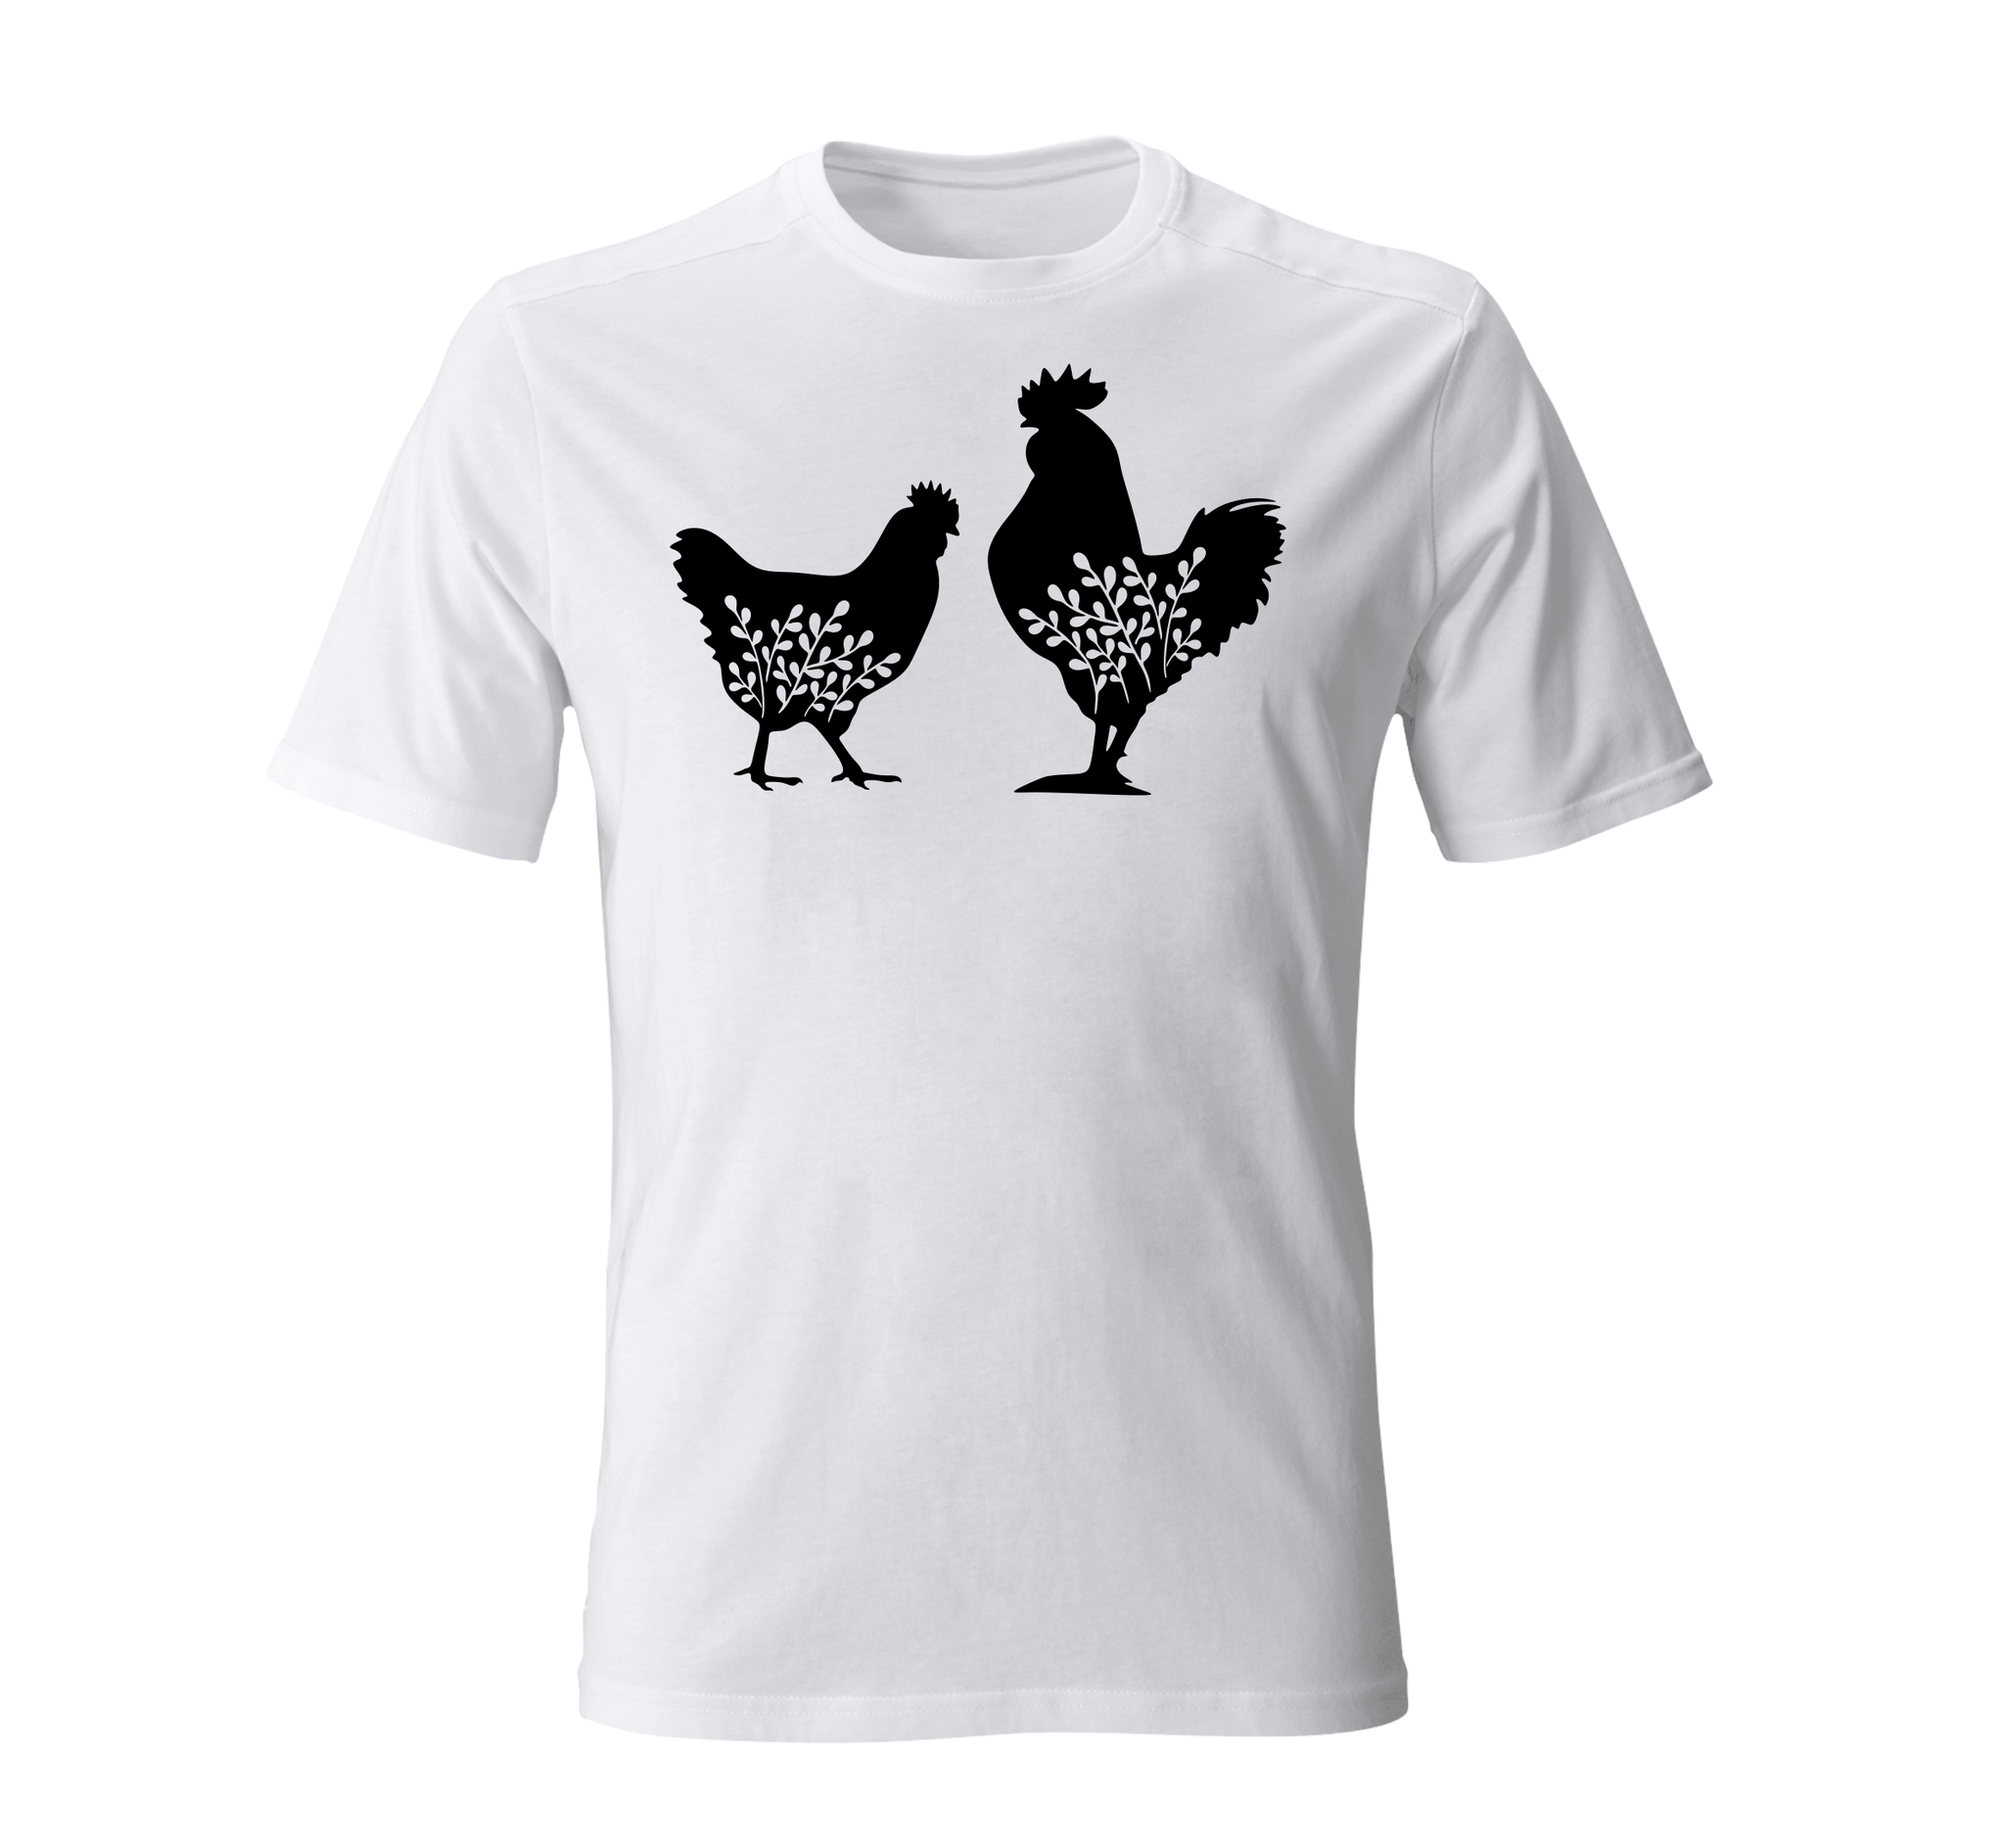 Farm birds for silhouette, download dxf designs, svg images for cricut ...